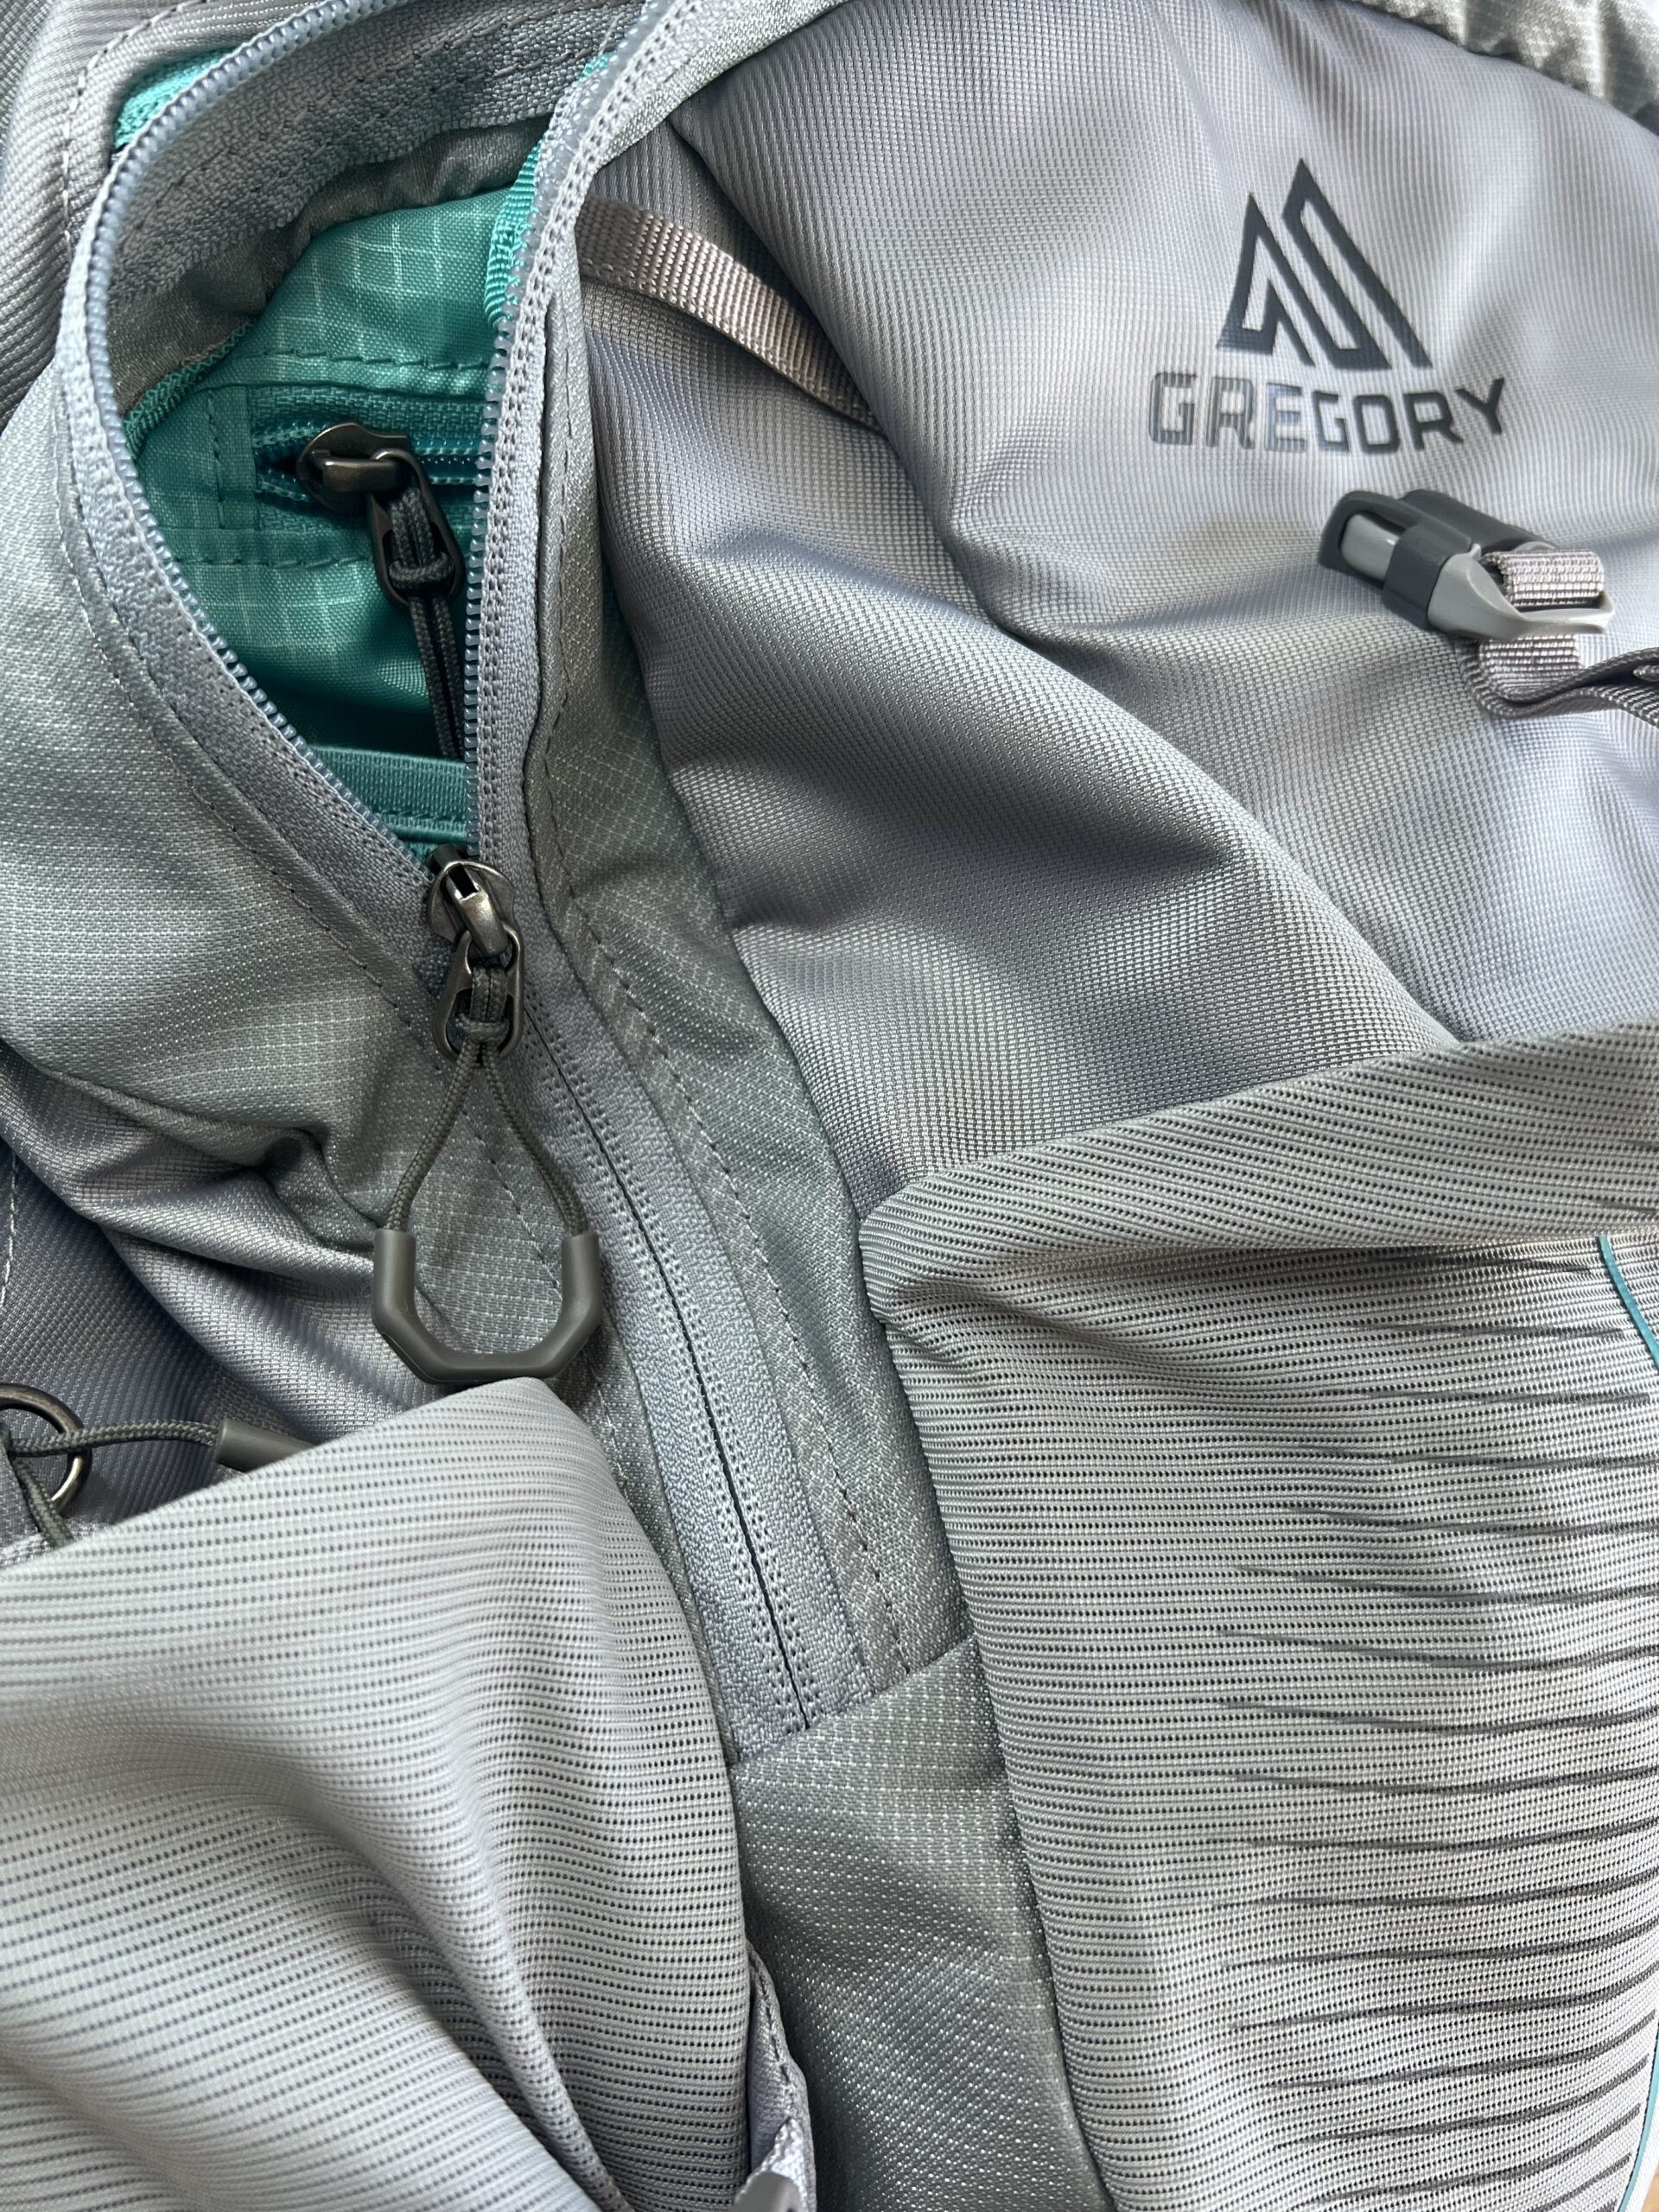 From the Mountains to the City: My One Year Review of Gregory Packs